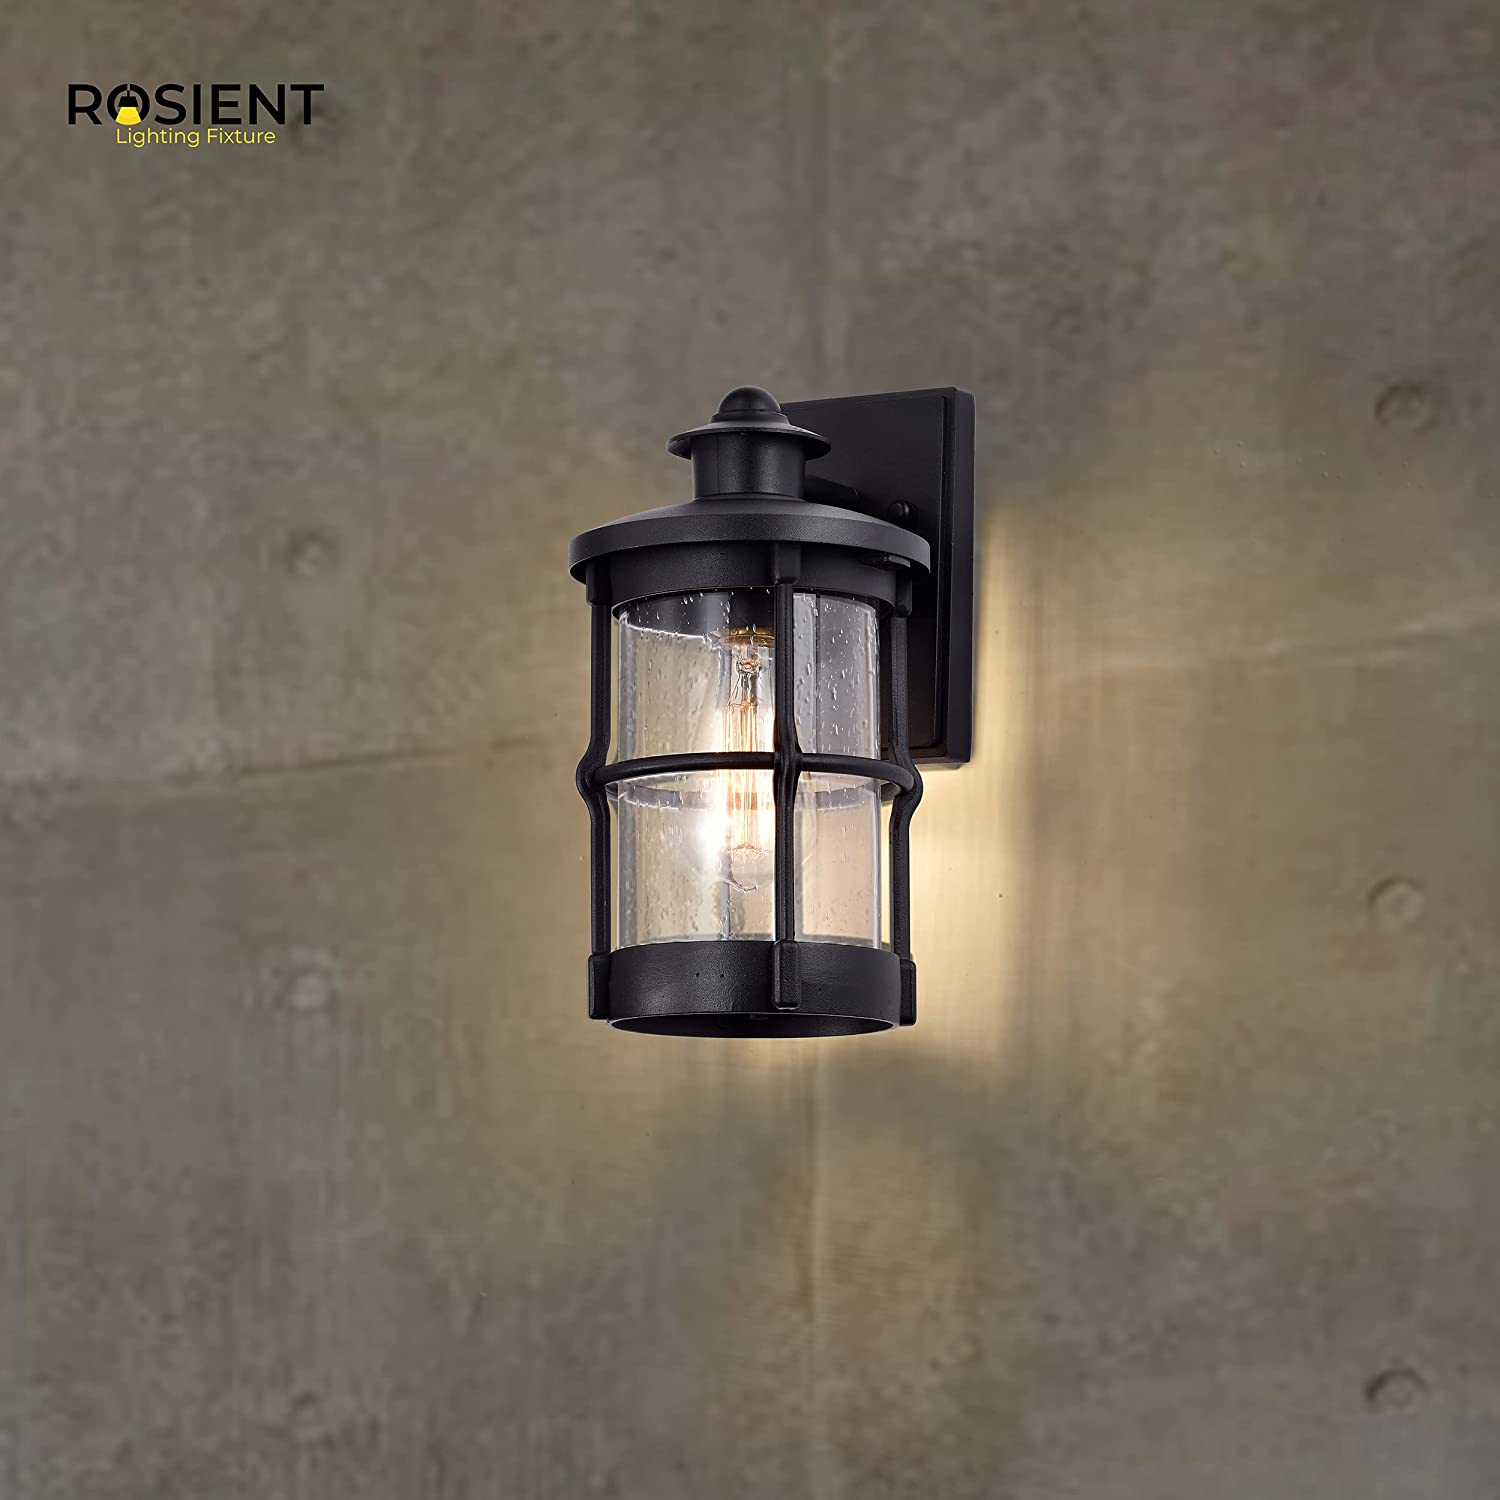 Black exterior lights for house outdoor wall sconce with seeded glass shade